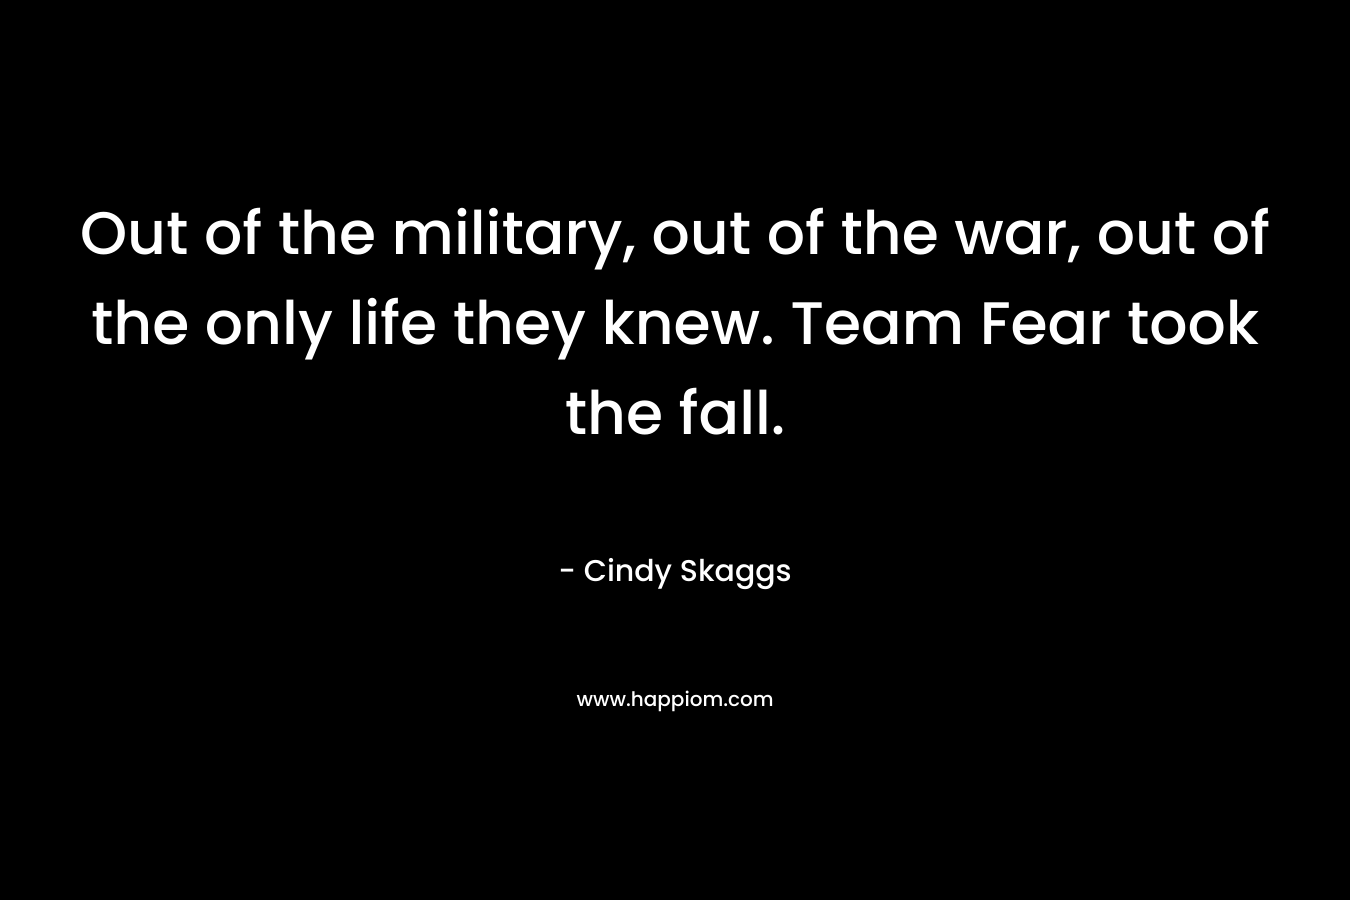 Out of the military, out of the war, out of the only life they knew. Team Fear took the fall.